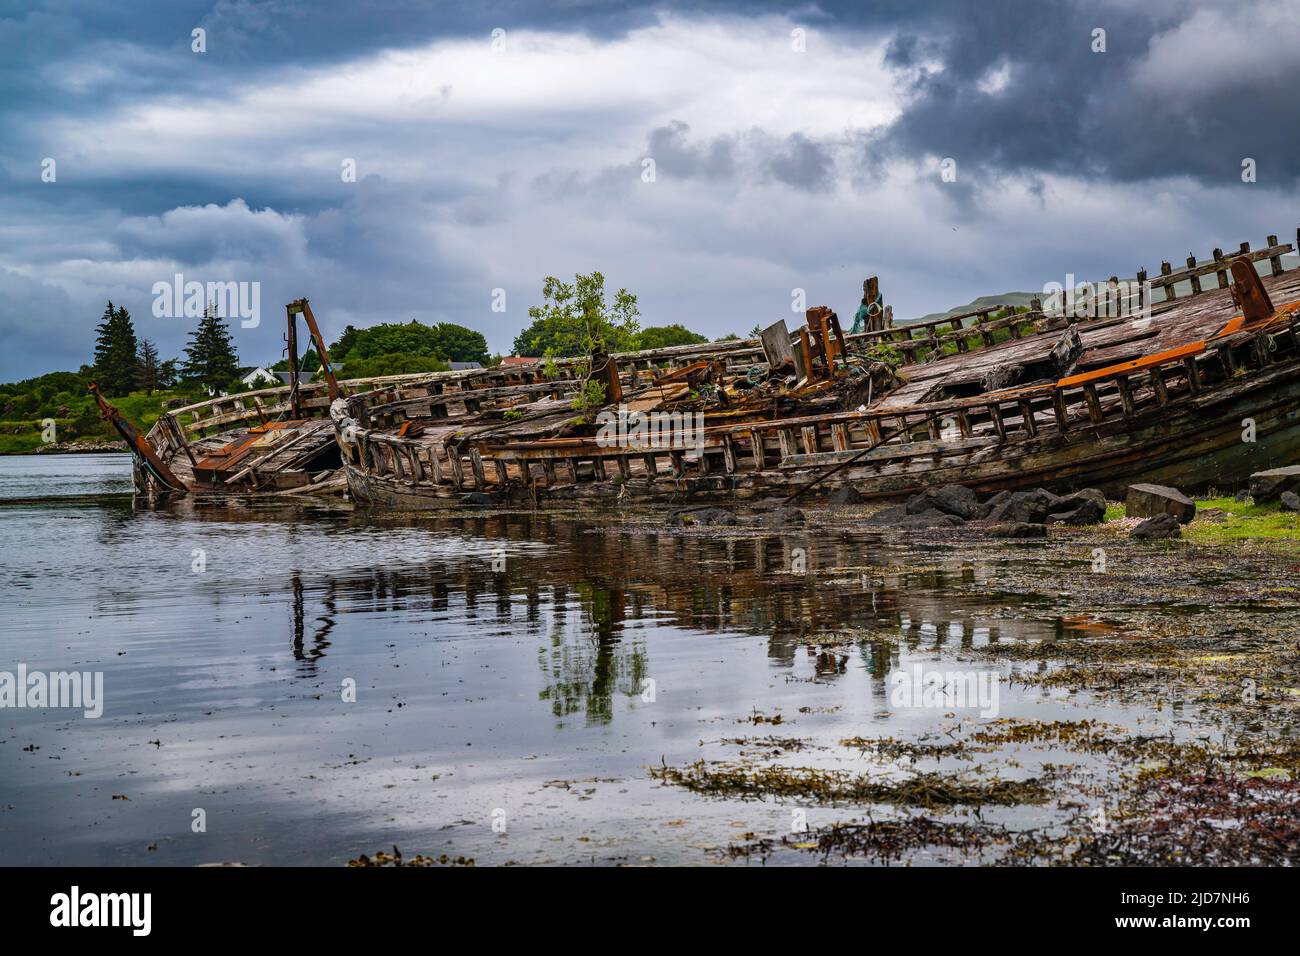 Salen, Isle of Mull, Scotland - Derelict wooden fishing boats abandoned on the beach which is slowly decaying and rotting Stock Photo